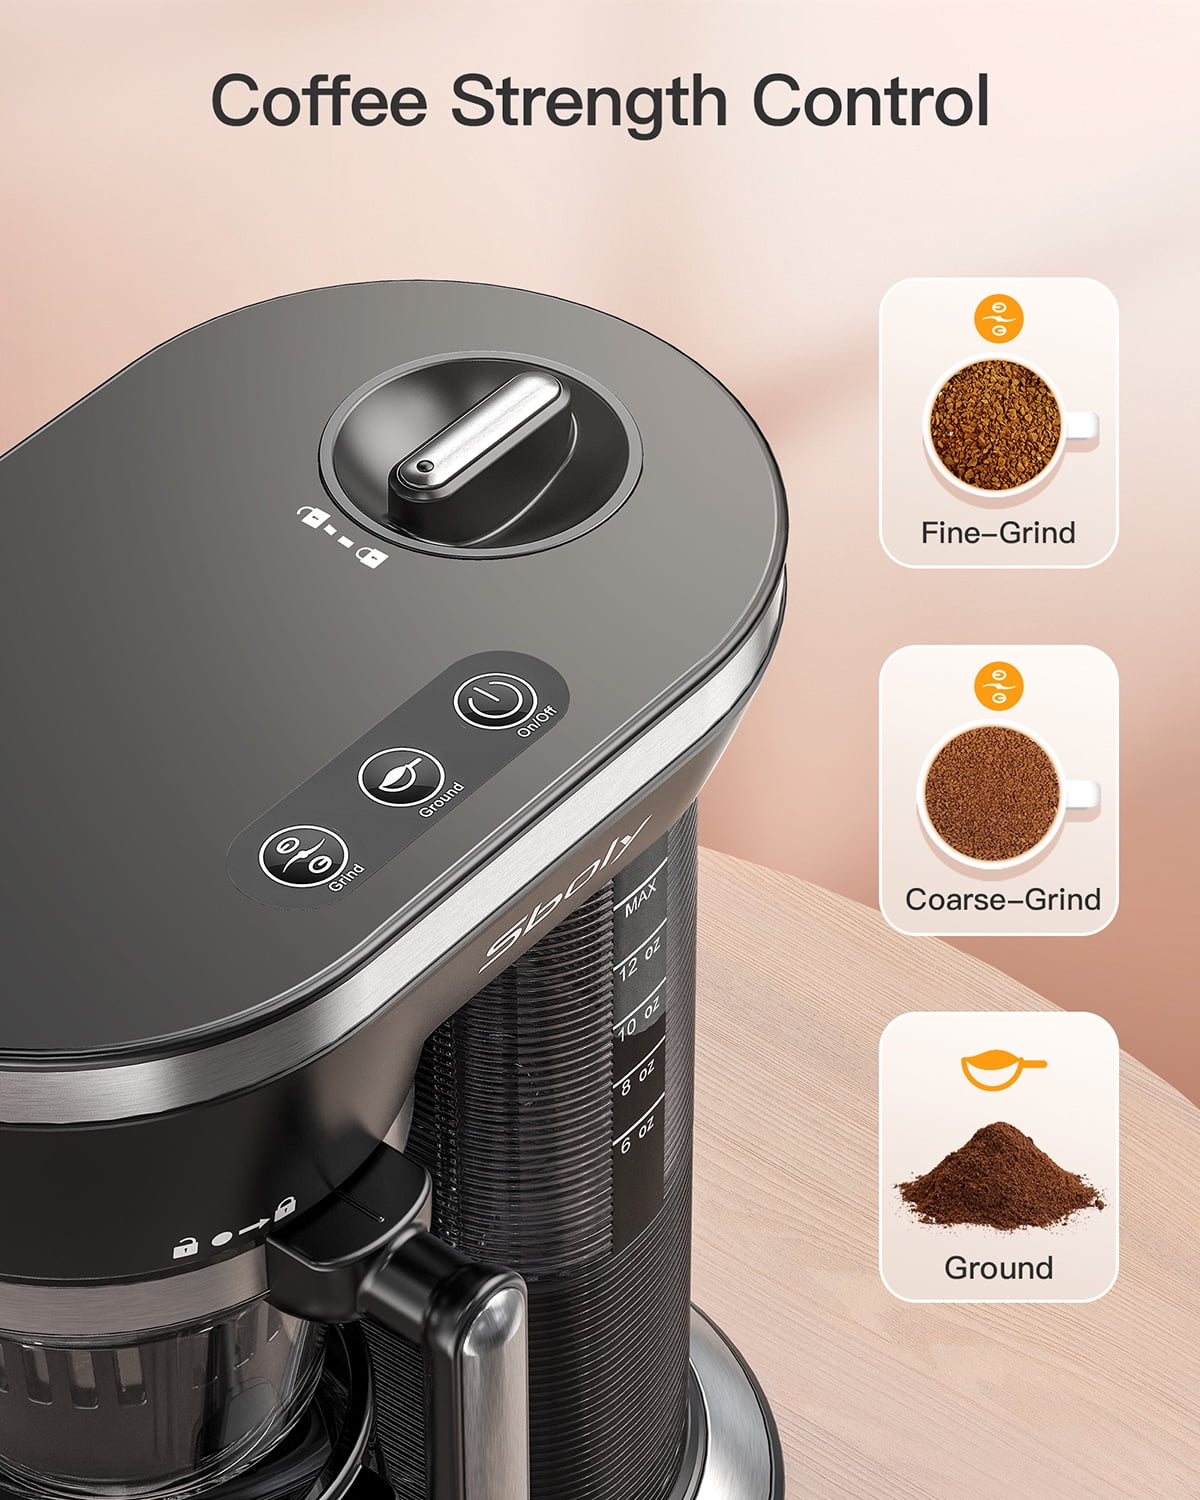 Bean to Cup Grind and Brew Coffee Maker, 2-in-1 One Cup Coffee machine Pods  Compact & Ground Coffee, Capacity 12-15.21 Oz Steam Pressure Technology